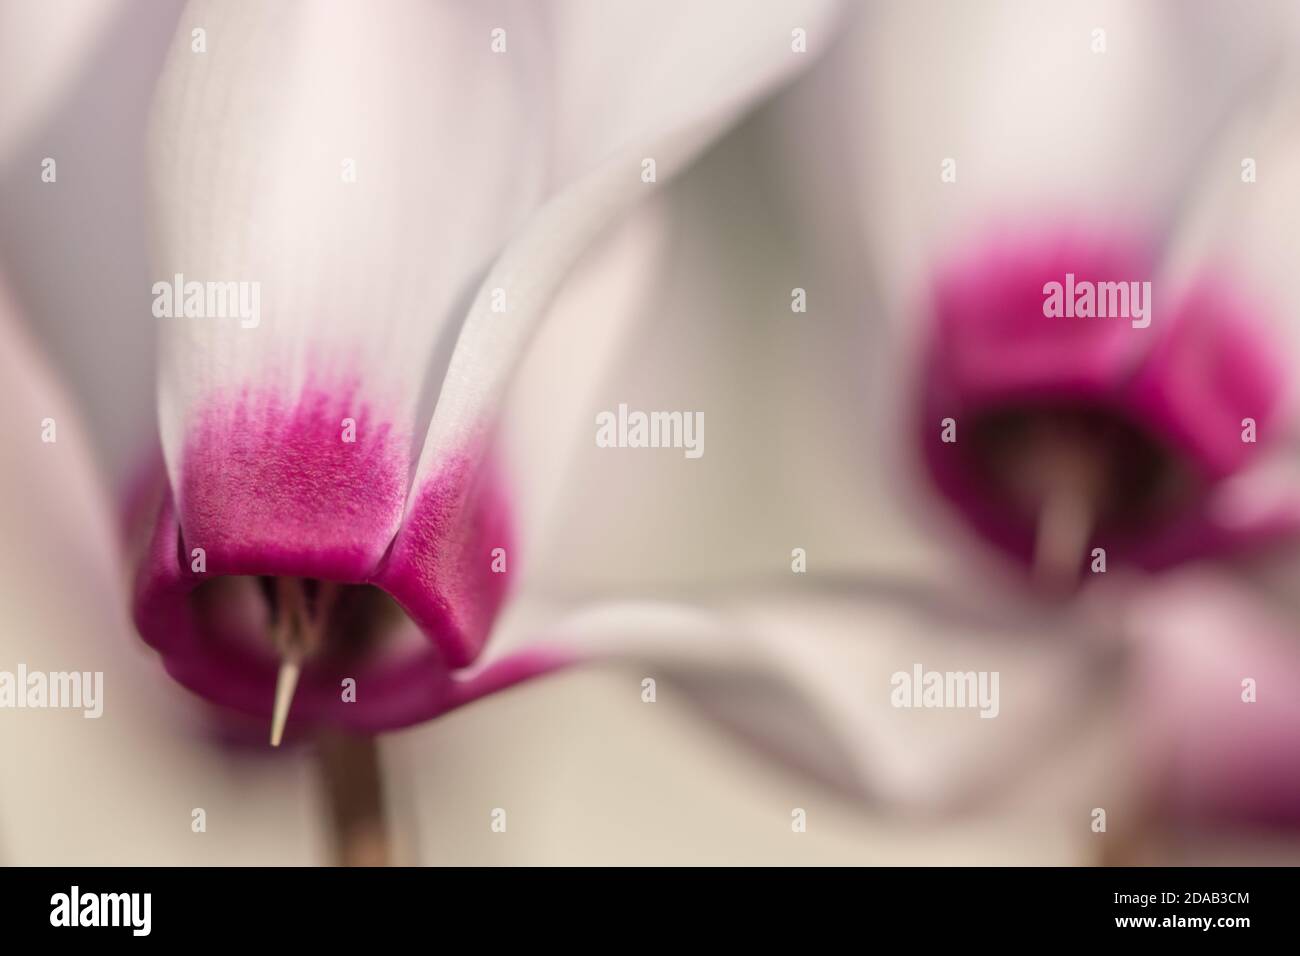 Isolated close up macro image of a blooming wild Cyclamen flowers- Israel Stock Photo